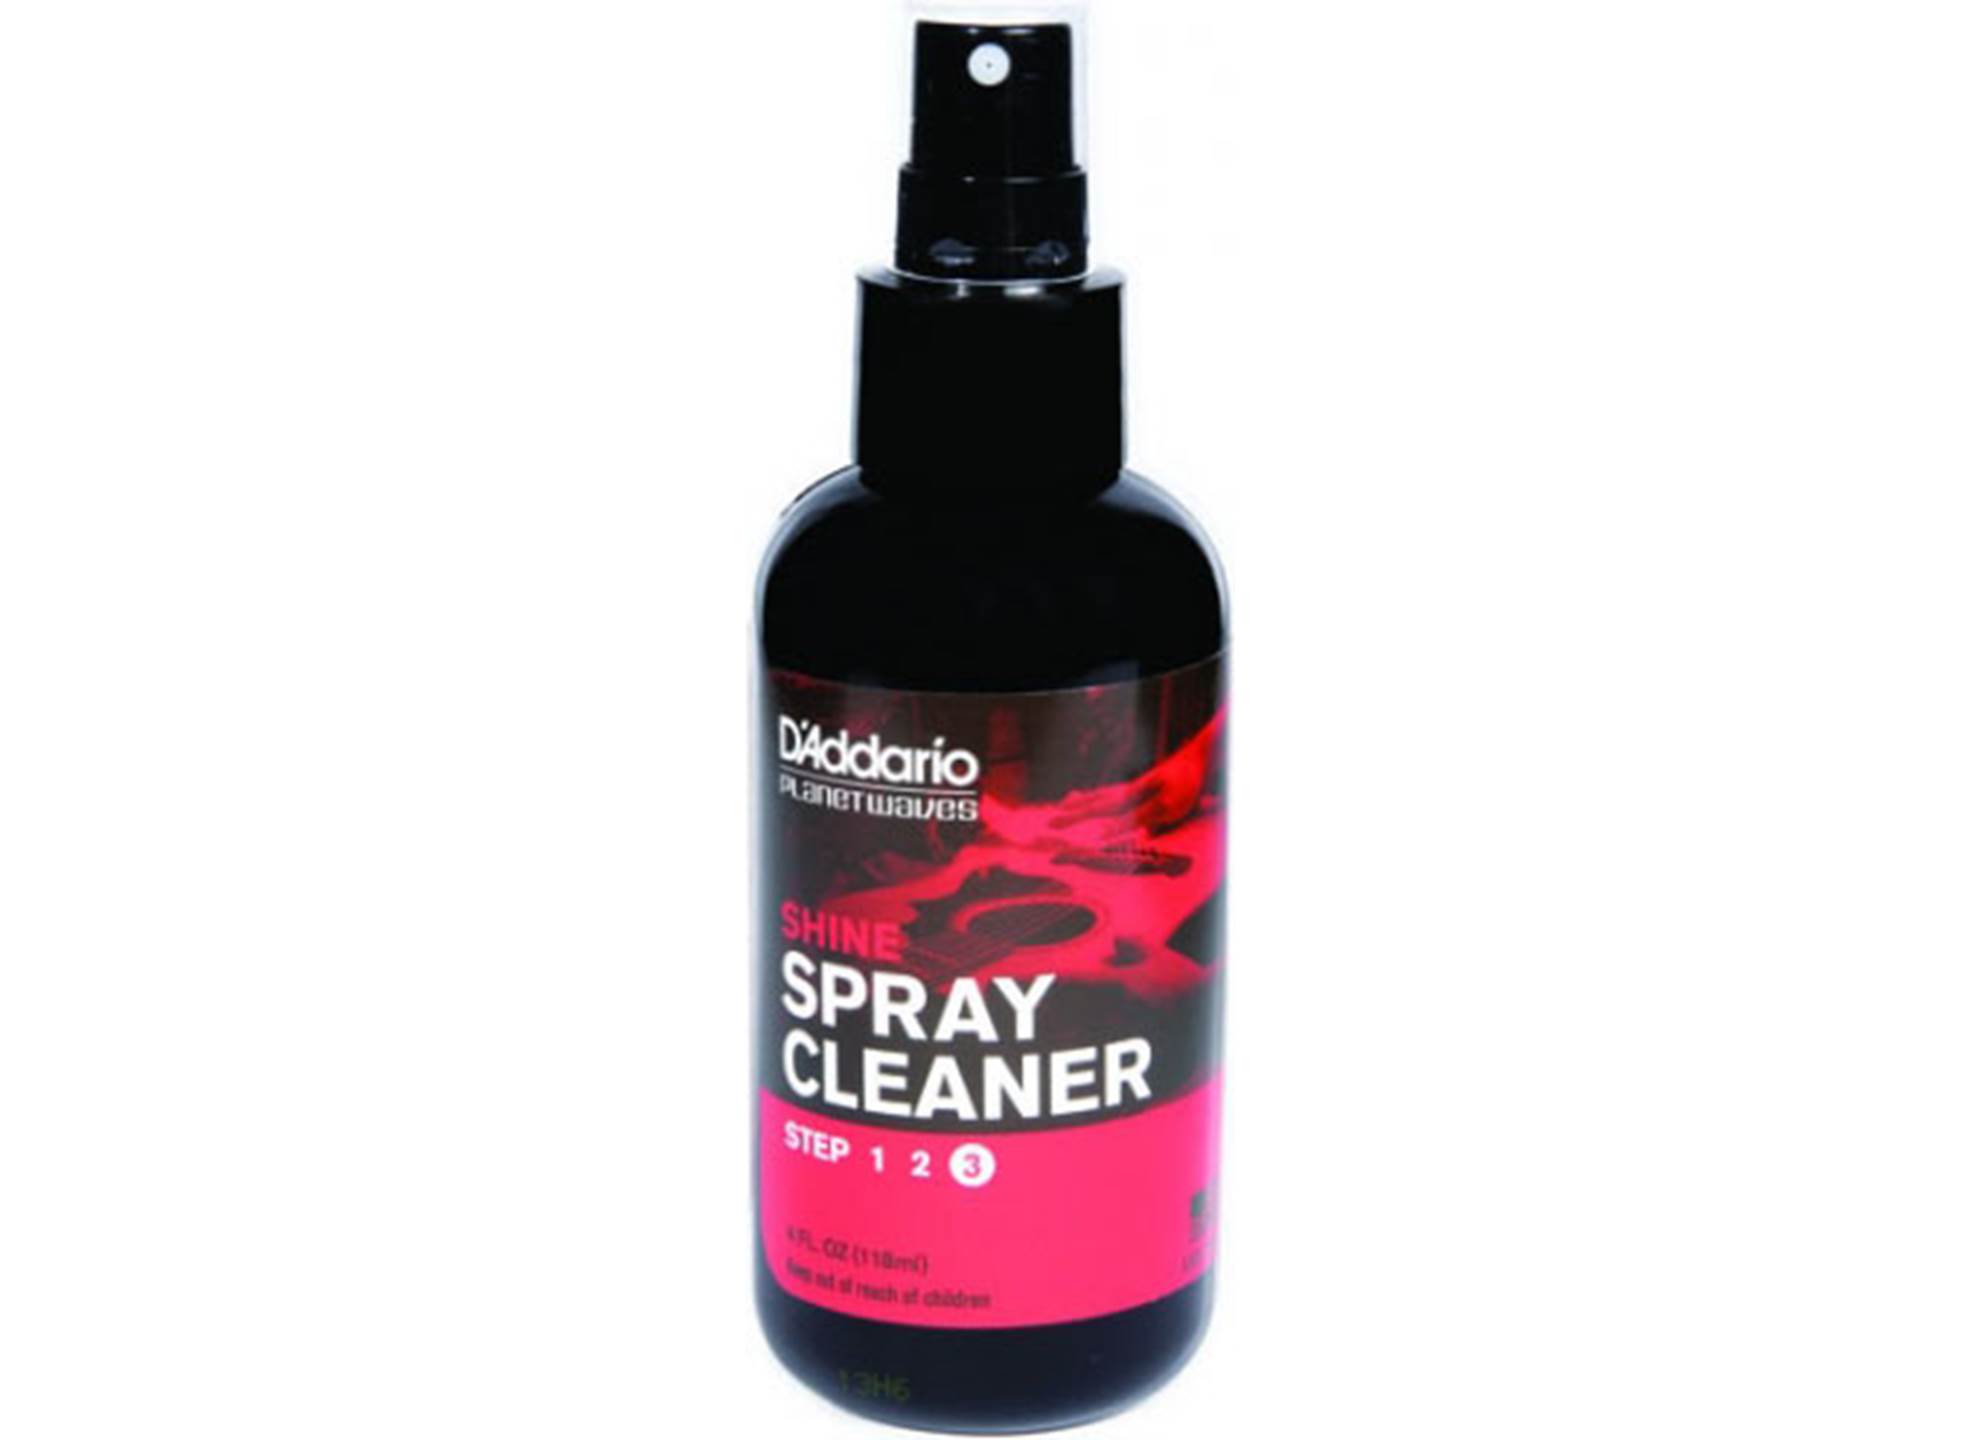 PW-PL-03 Spray Cleaner